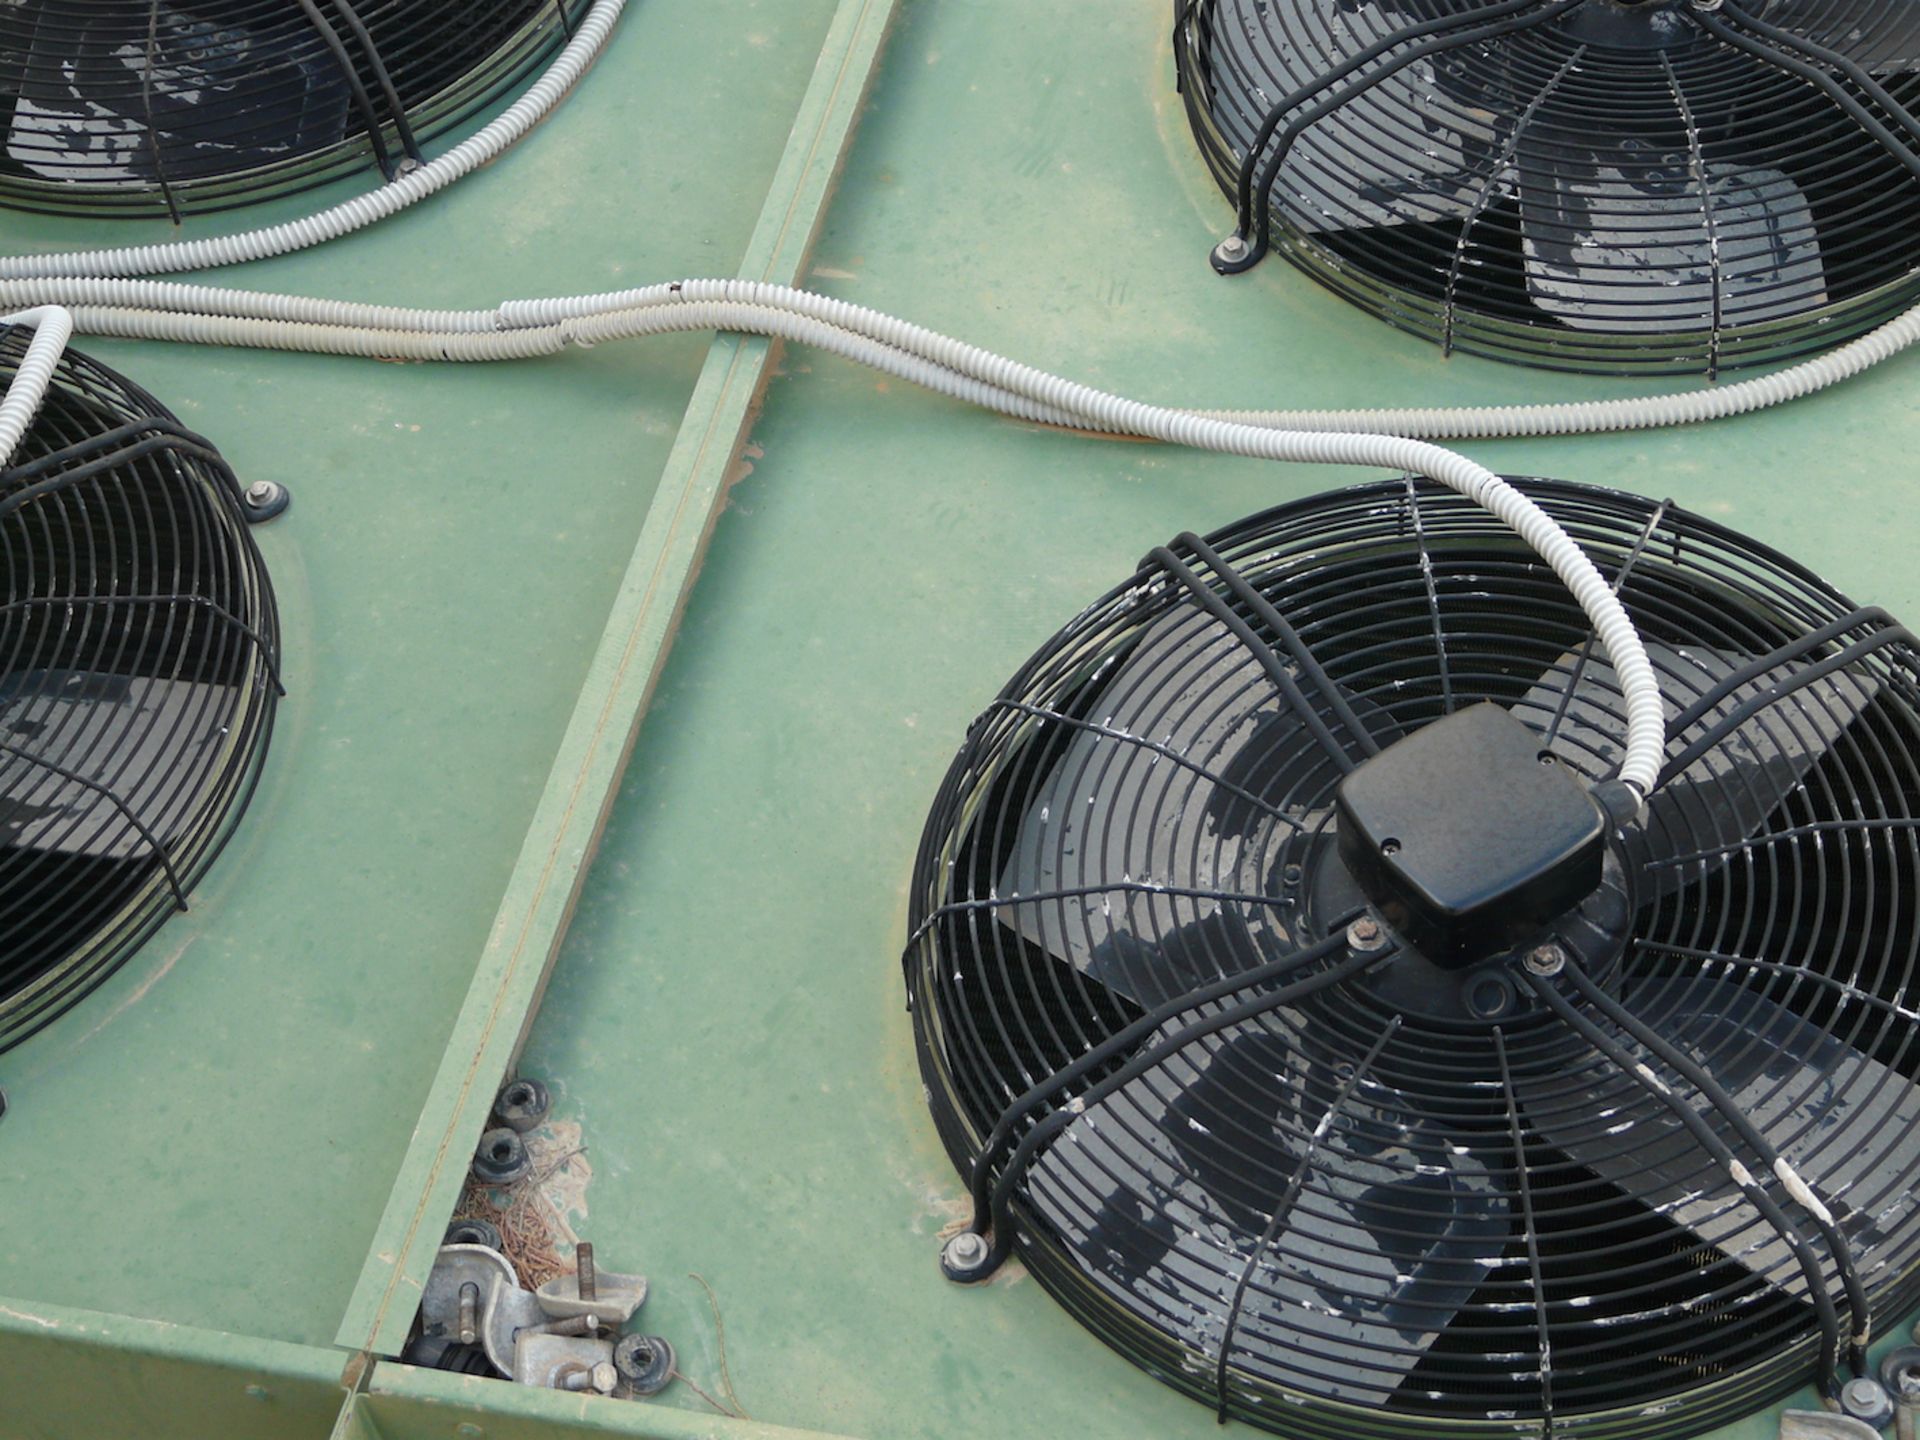 English: Condenser with 4 fans (one is out of order) 180m³ Used for Cold Rooms Greek: Κοντέσερ - Image 2 of 9